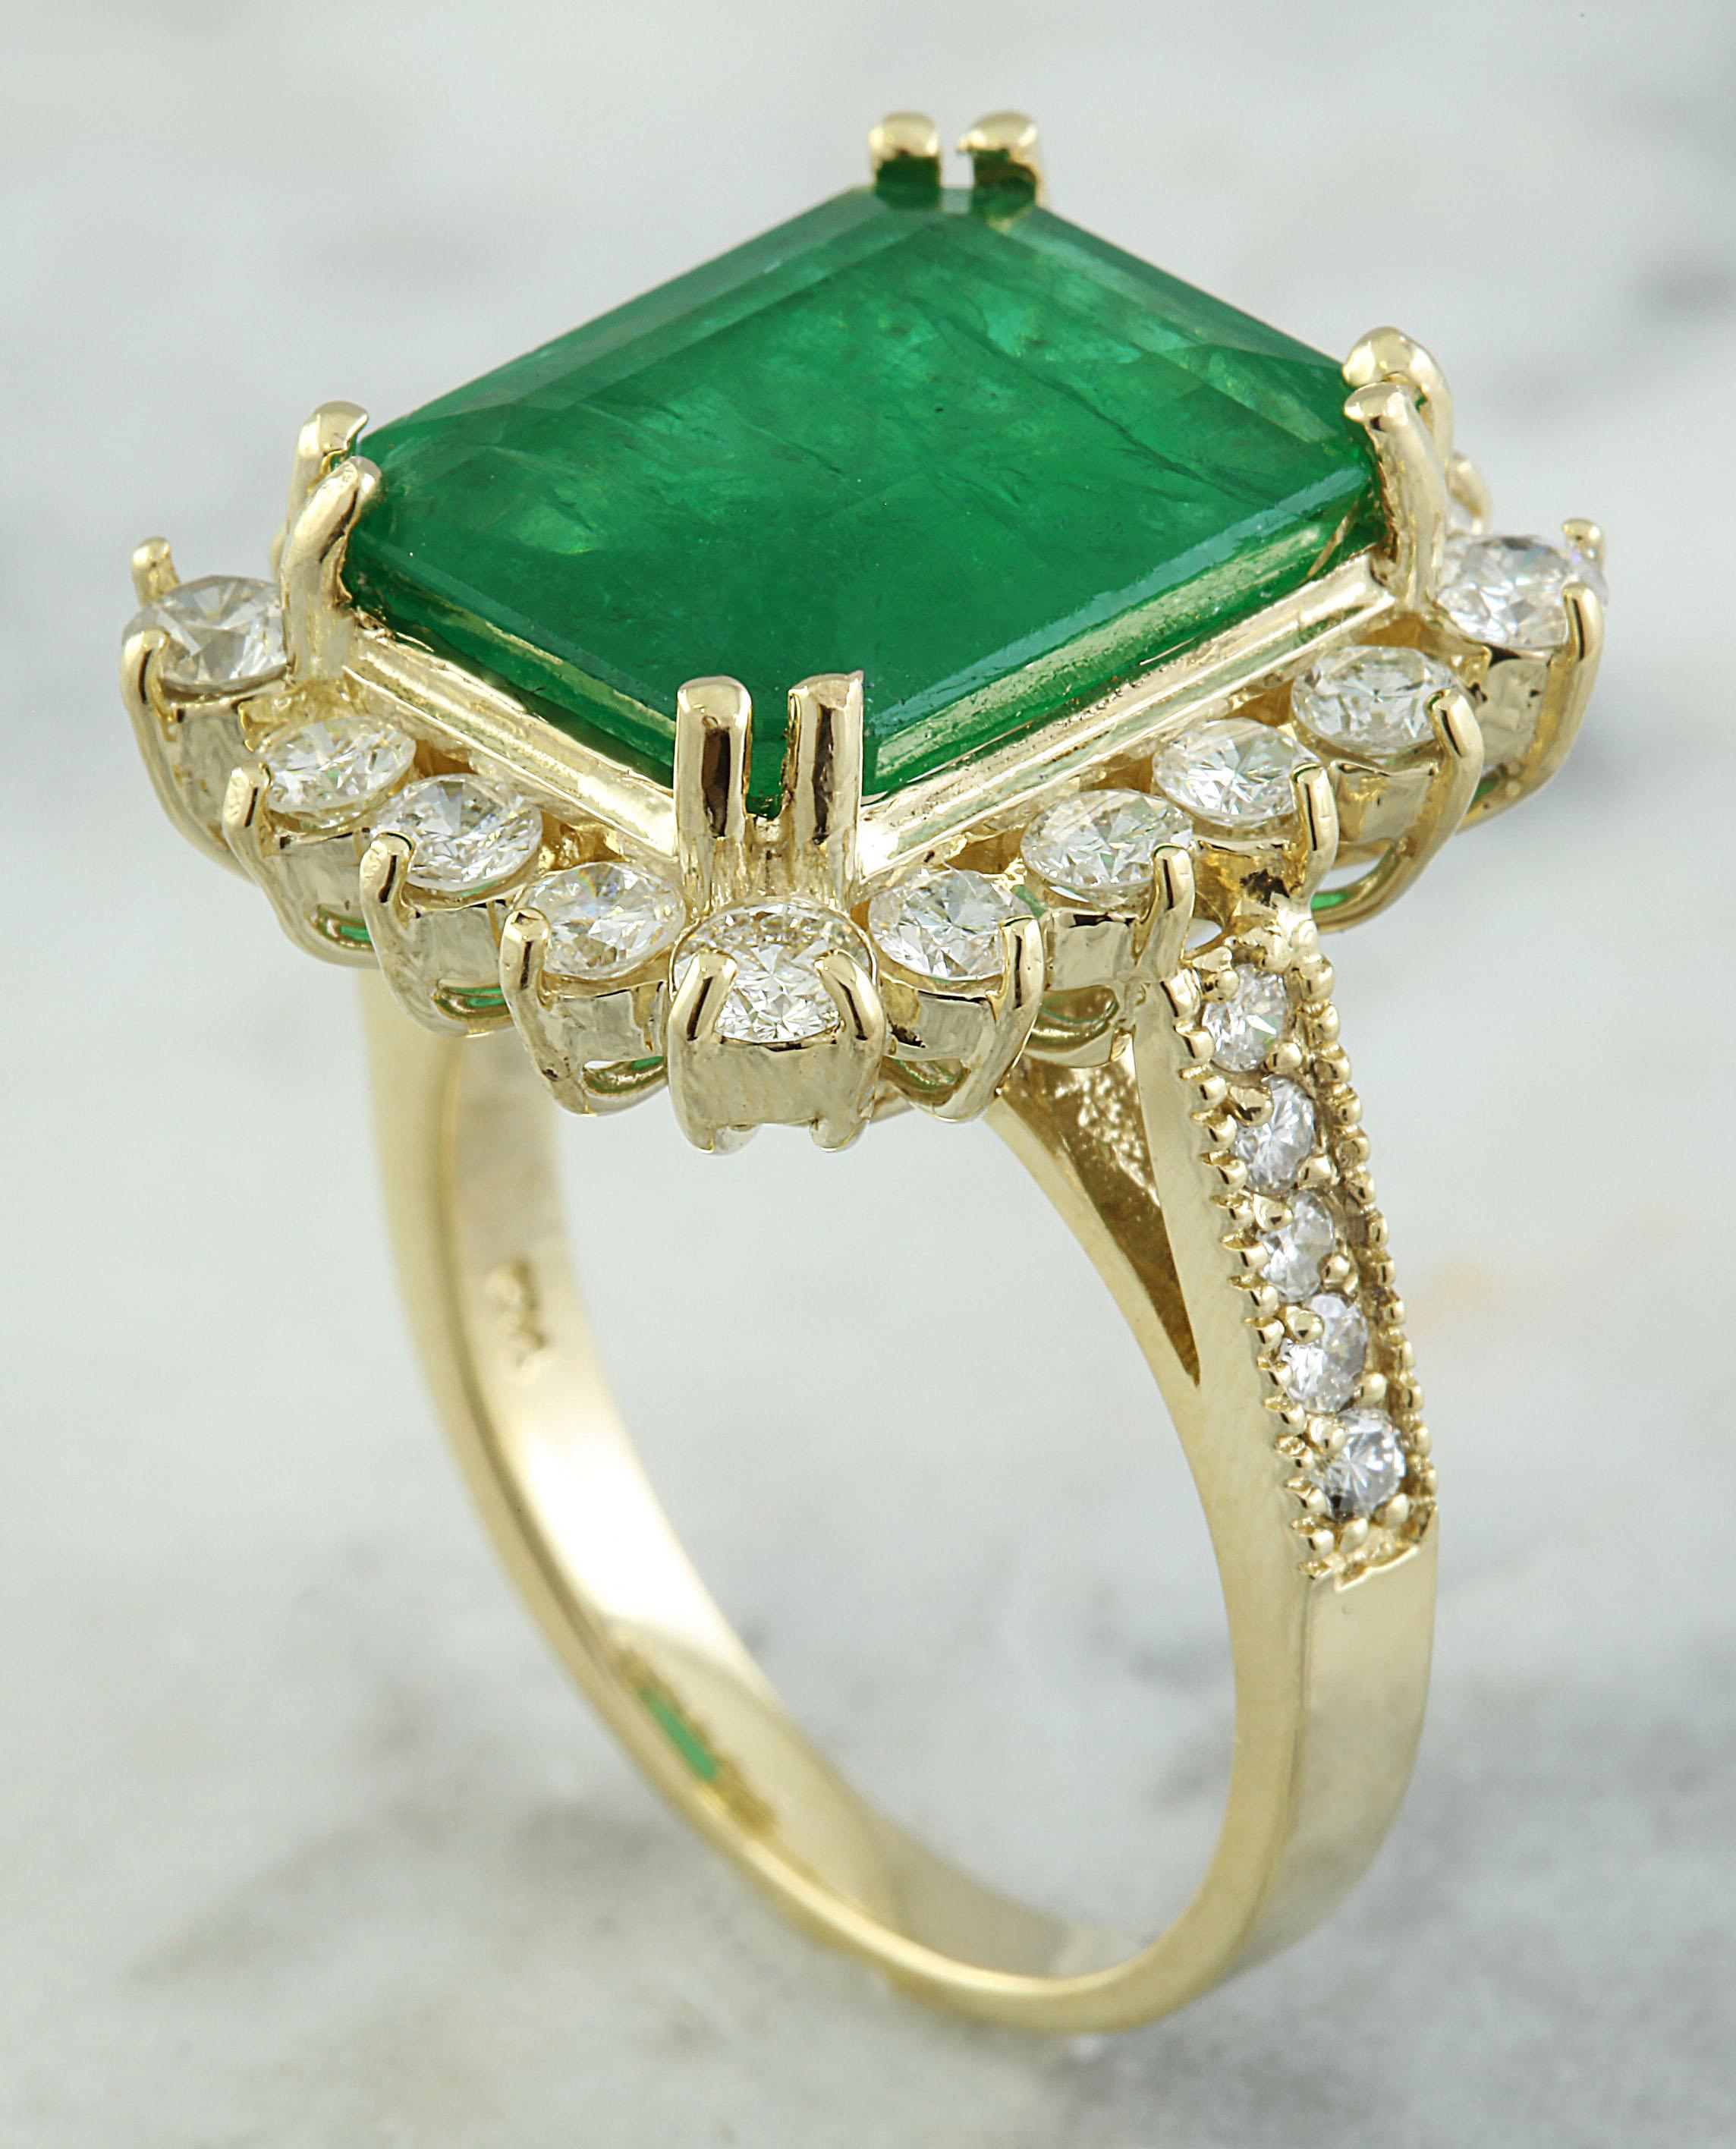 Emerald Cut Natural Emerald 14 Karat Solid Yellow Gold Diamond Ring For Sale